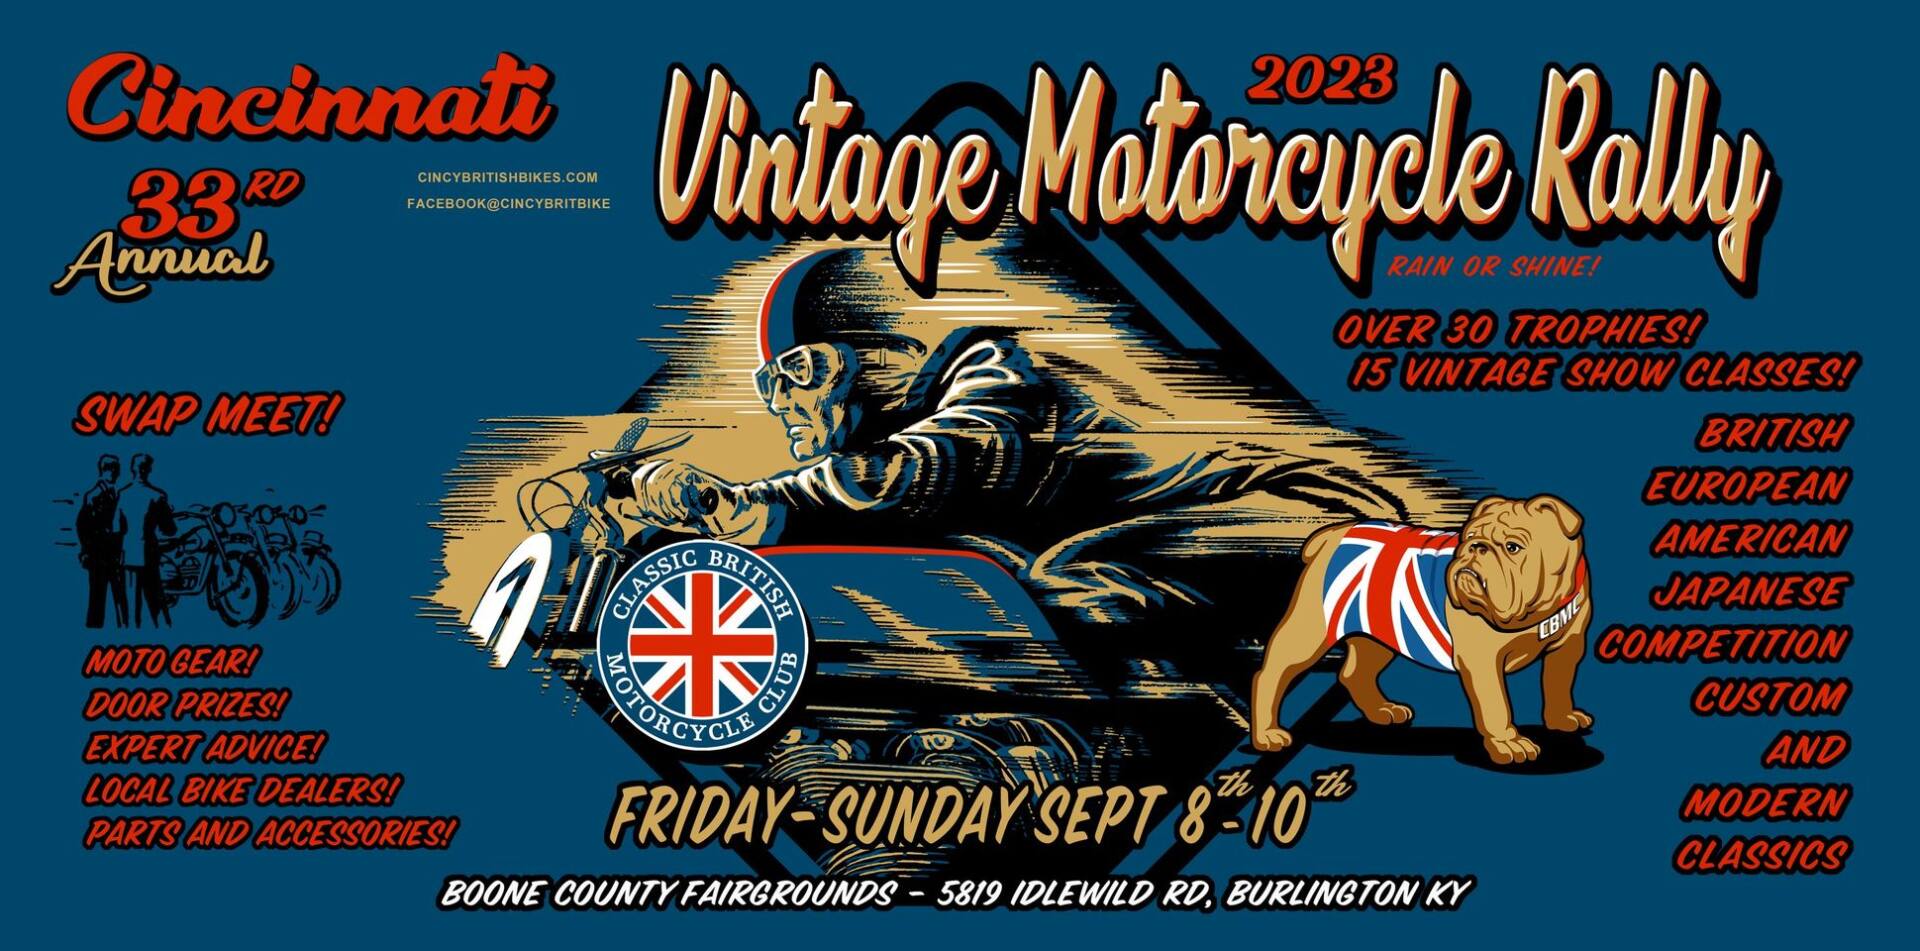 Classic British Motorcycle Club poster for the 2023 Vintage Rally